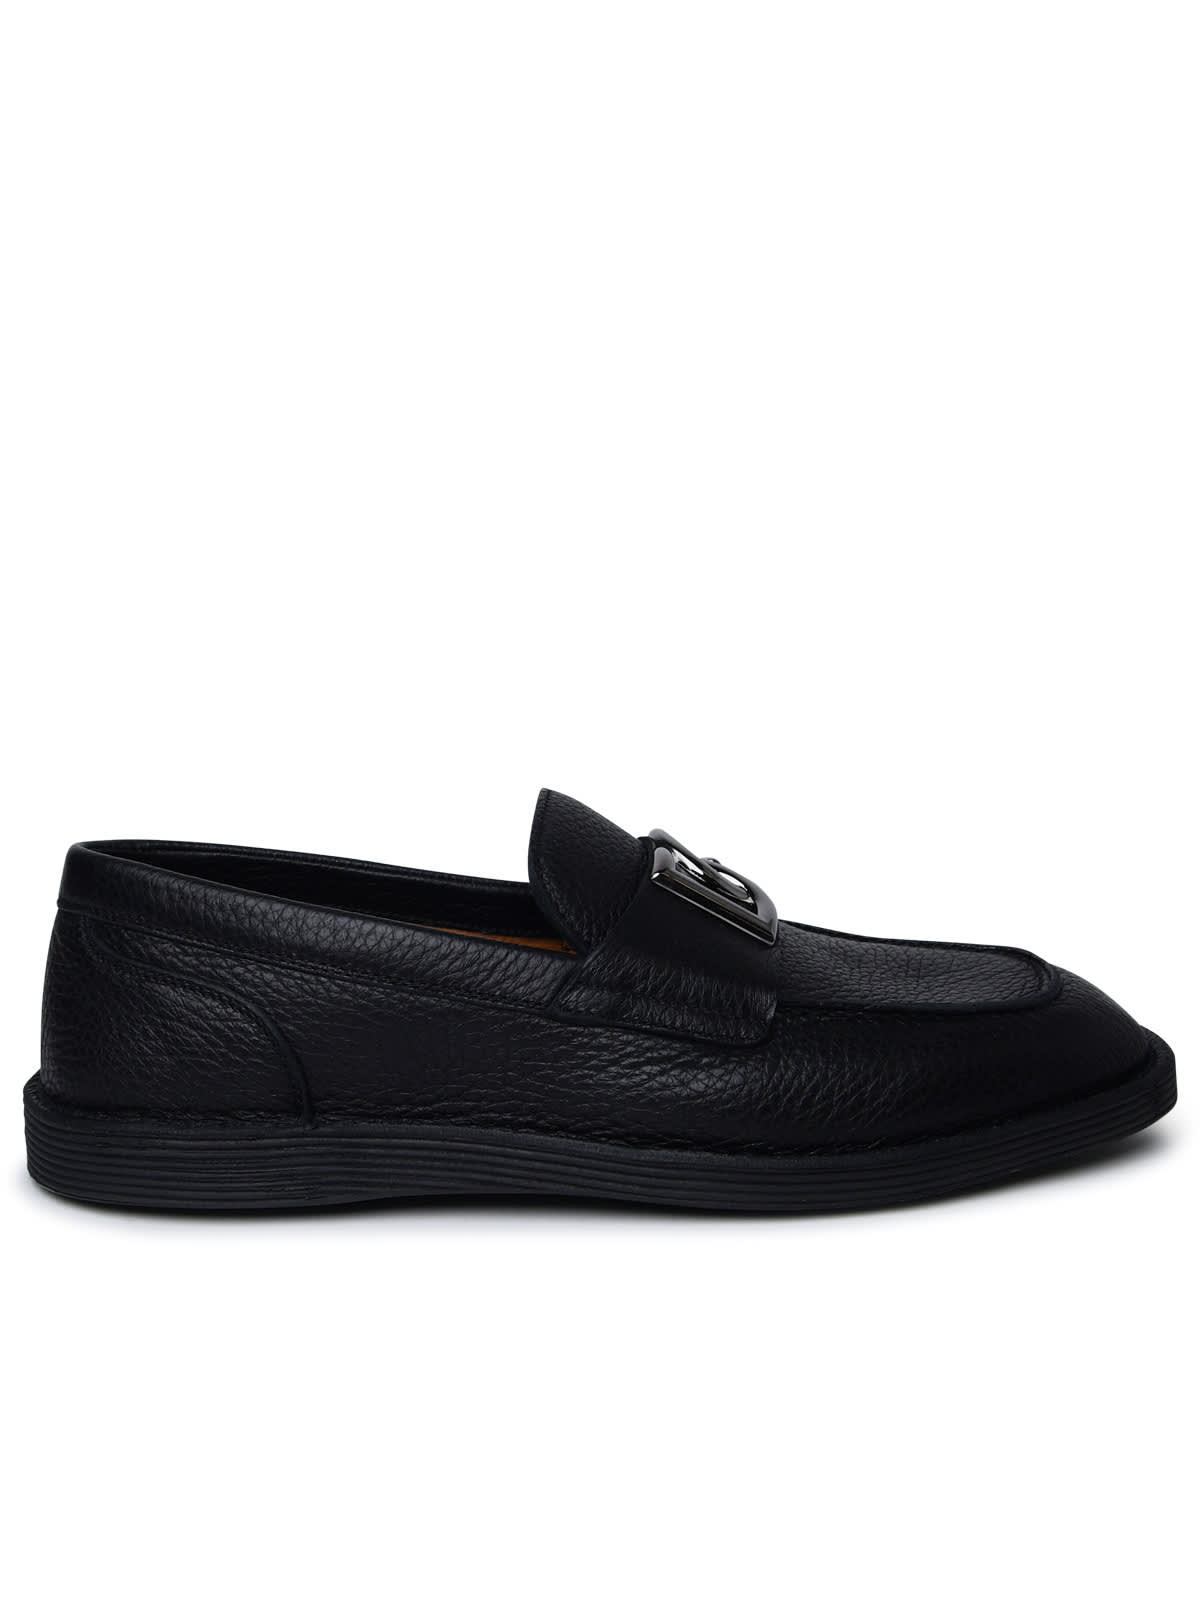 DOLCE & GABBANA BLACK LEATHER LOAFERS